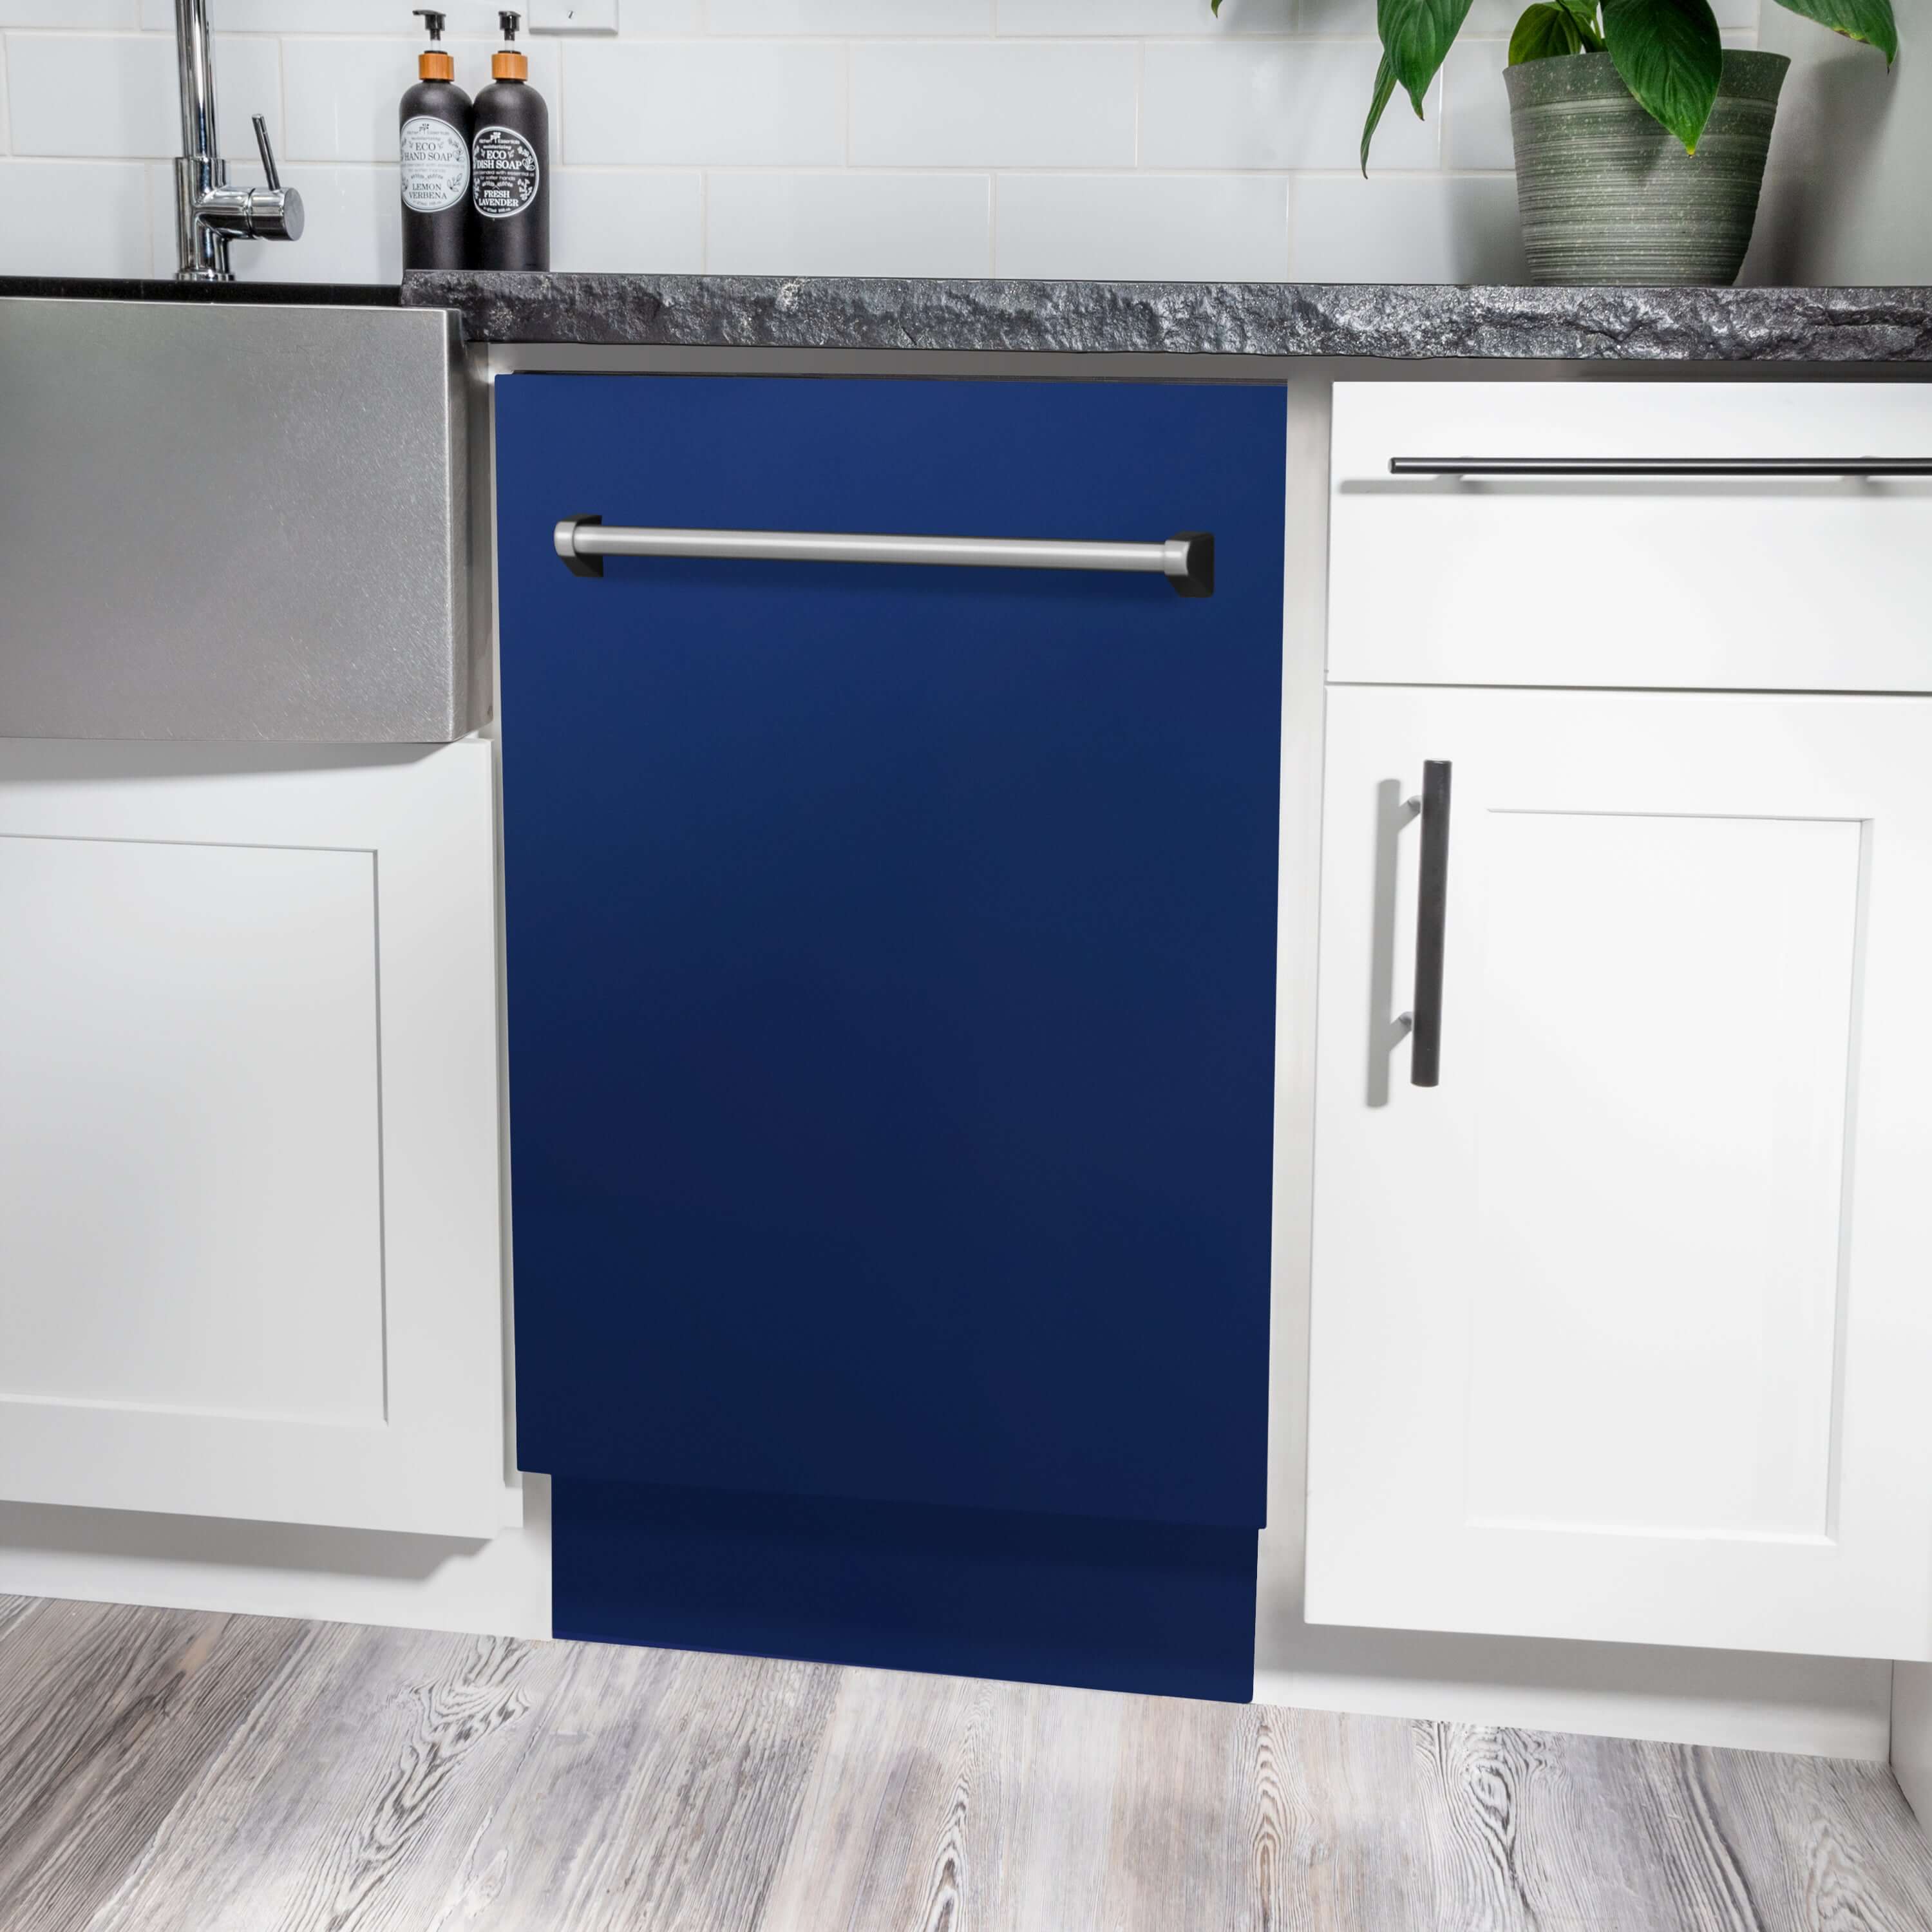 ZLINE 18 in. Tallac Series 3rd Rack Top Control Built-In Dishwasher in Blue Gloss with Stainless Steel Tub, 51dBa (DWV-BG-18) built-in to white cabinets with granite countertops in a luxury kitchen.